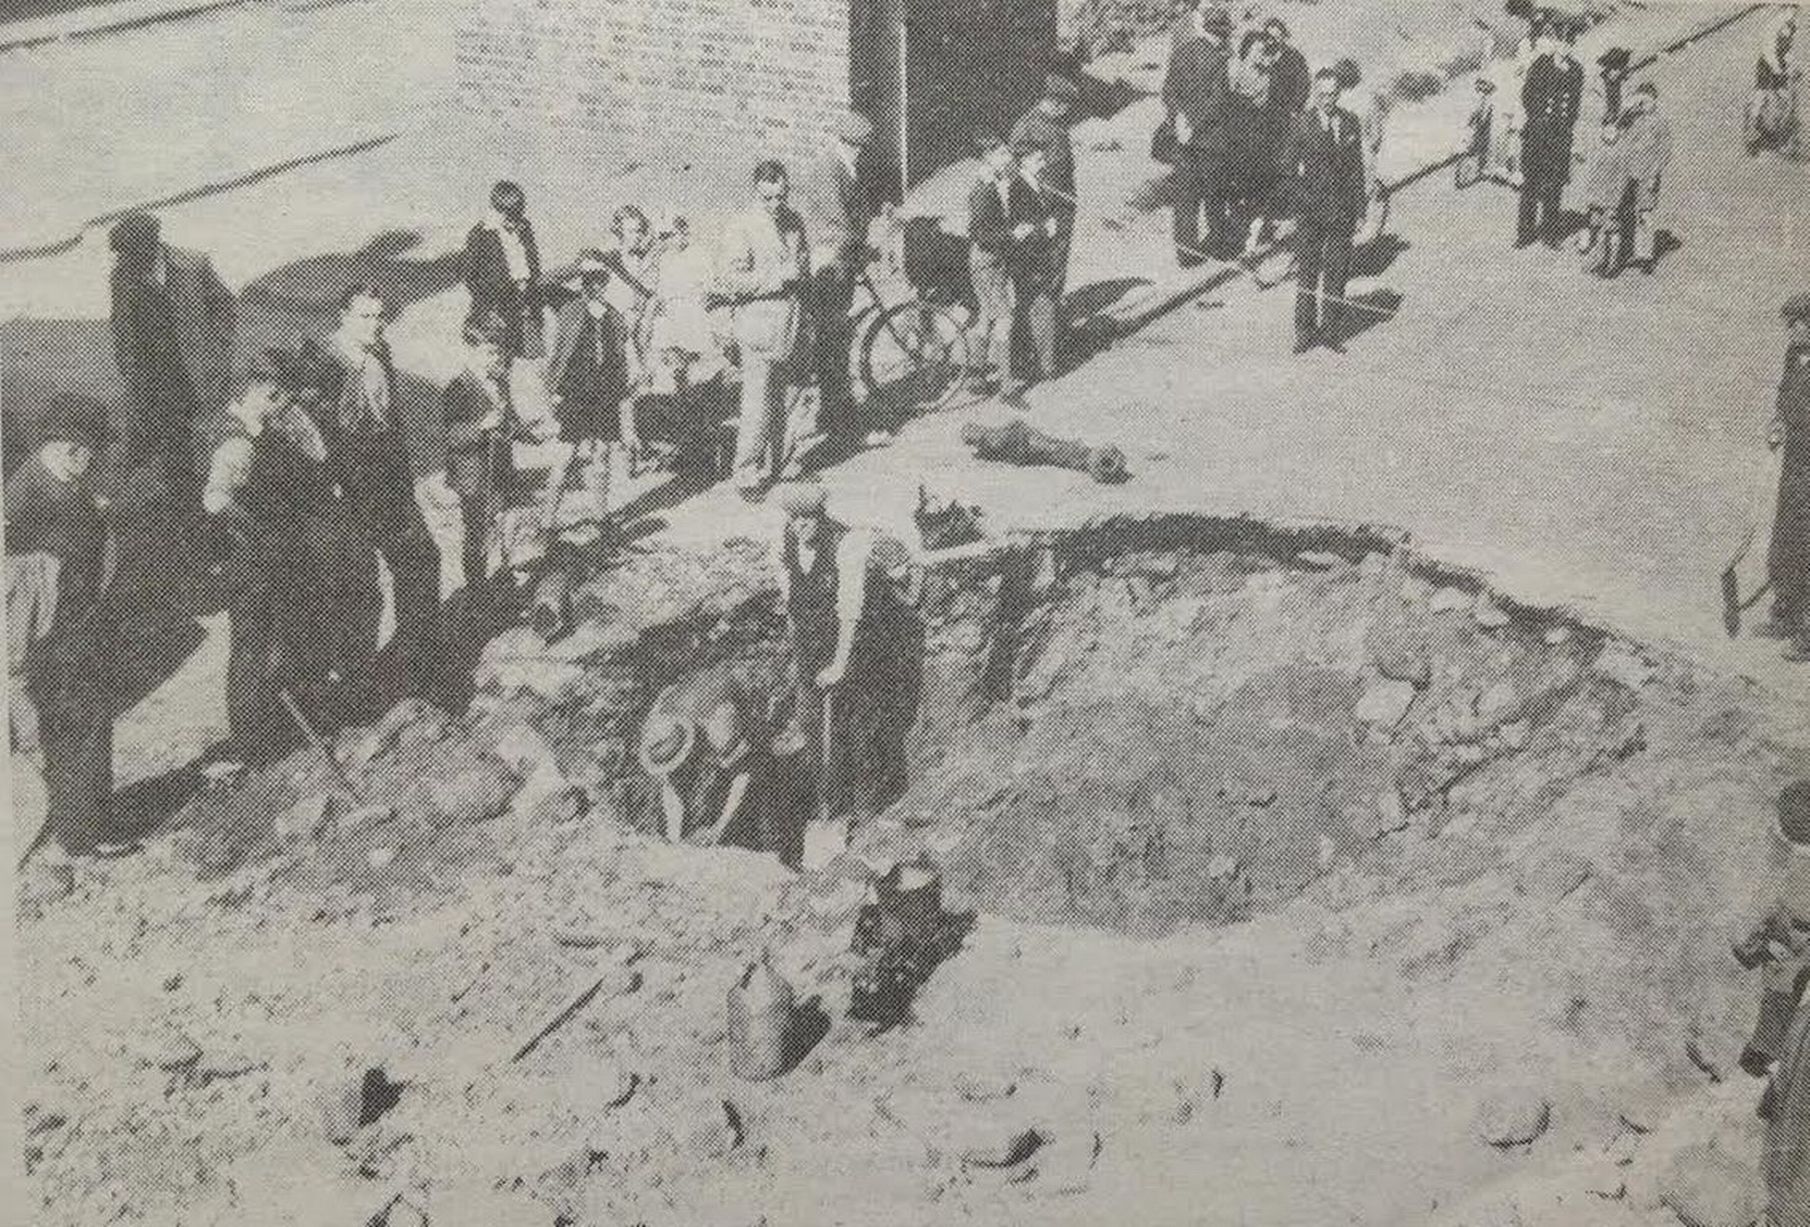 Passers-by watch workmen repair a burst water main in this huge bomb crater in East Street in Waterloo after a German bombing raid in 1940 during World War II